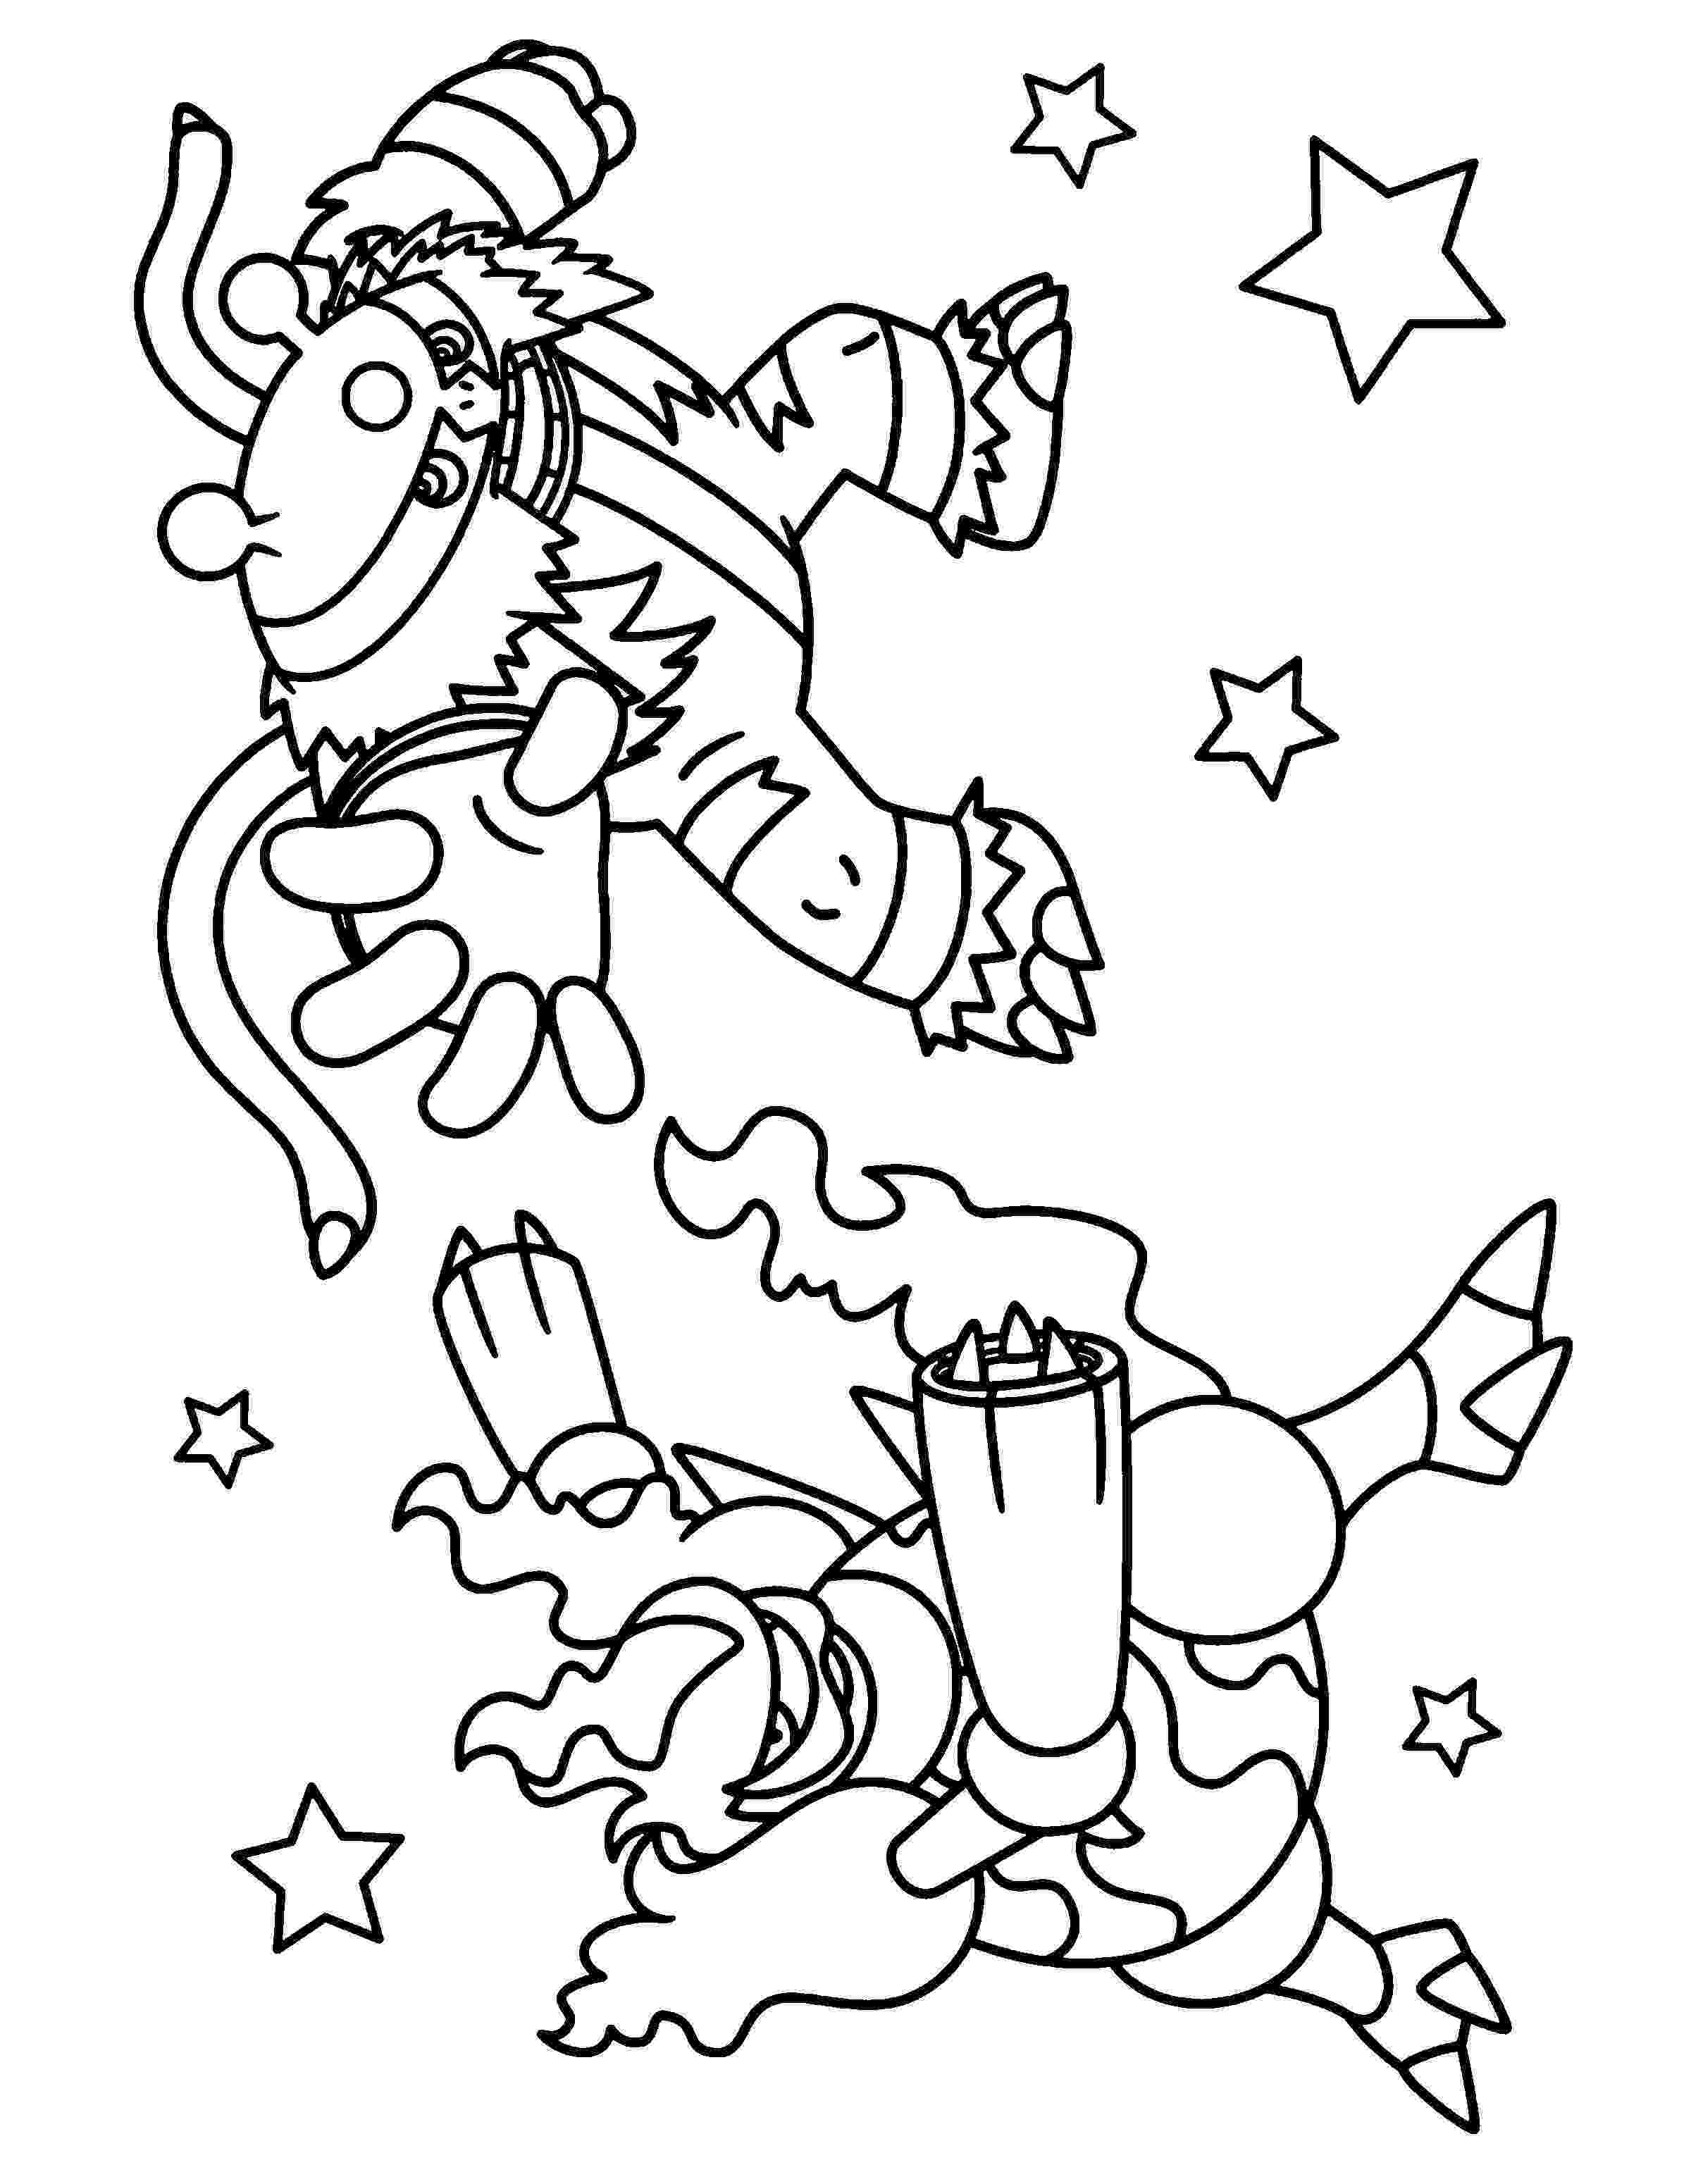 pokemon card coloring pages pokemon coloring book ぬりえ hellosugah livejournal pages pokemon card coloring 